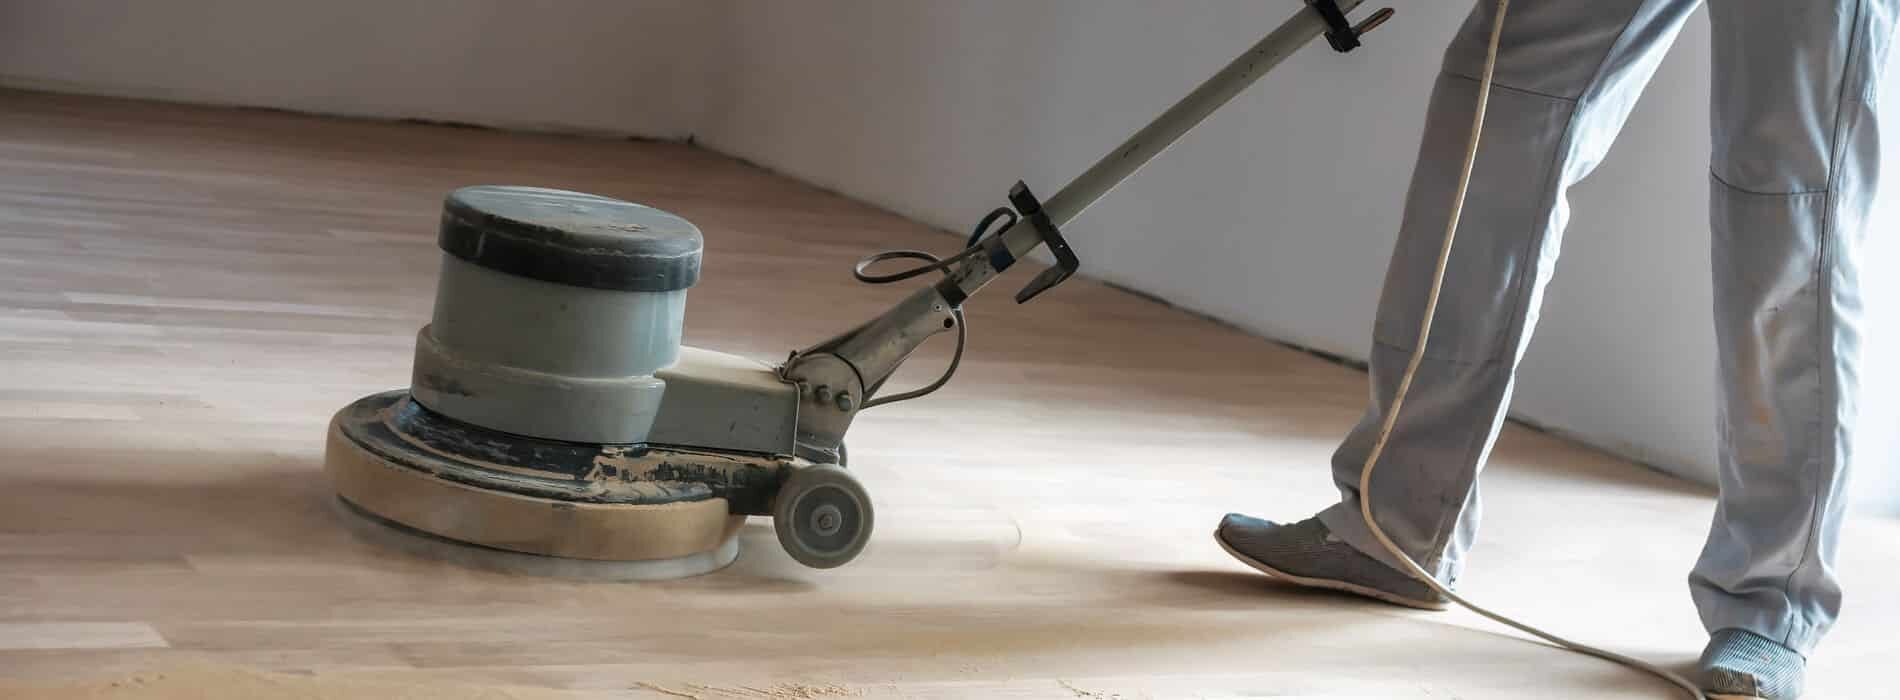 Our professional team enhances the shine of a parquet floor using a potent 240v polisher with a 407mm driving plate and a 60grit screen, ensuring a perfect finish.